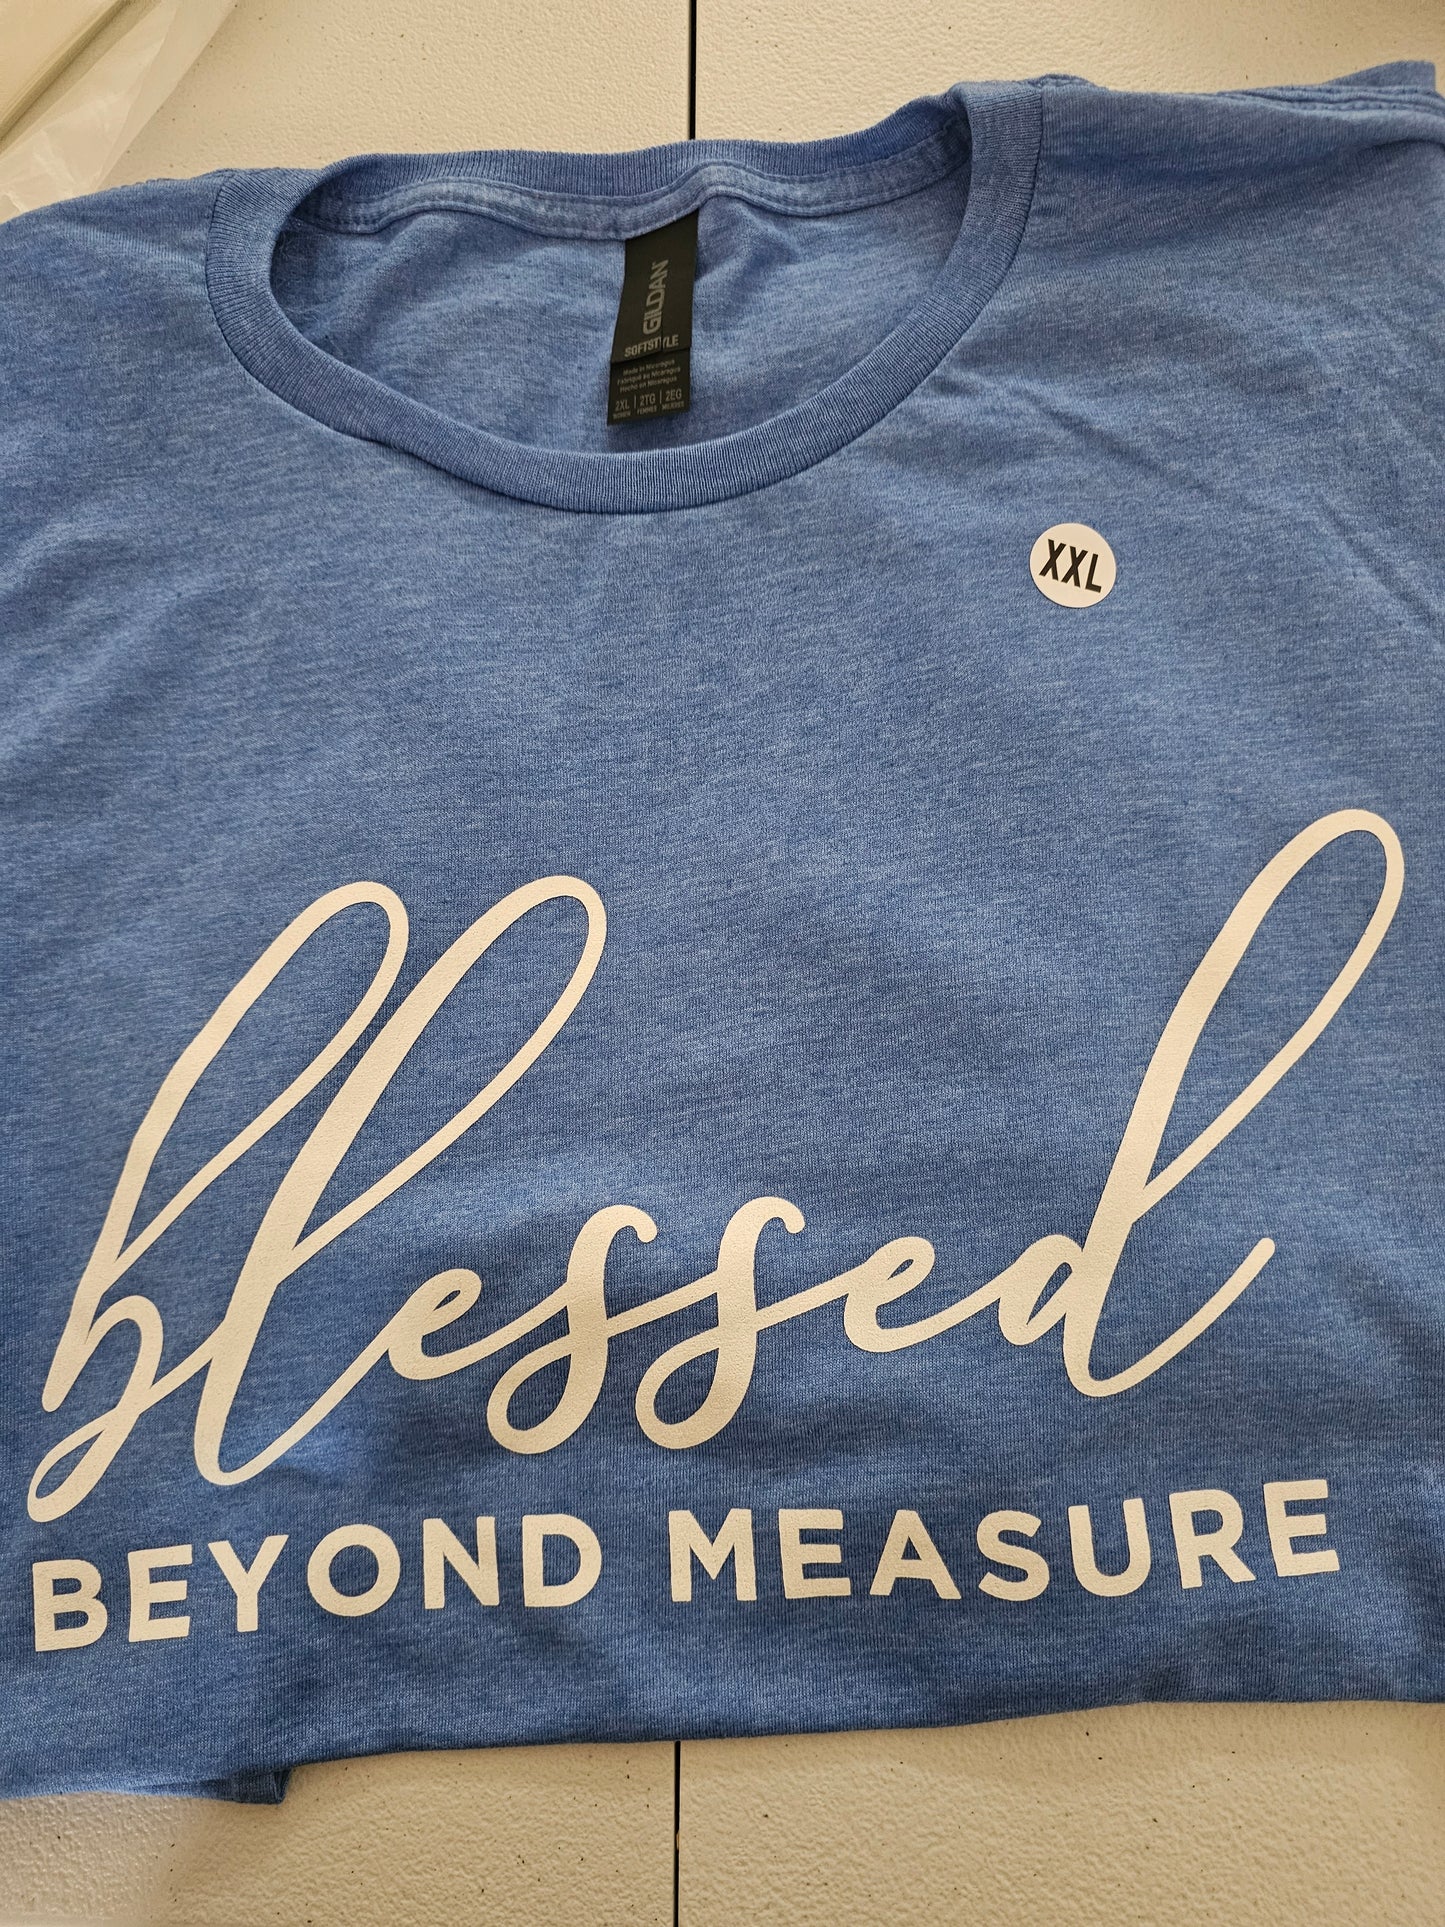 Blessed Beyond Measures Handmade Graphic T Shirt